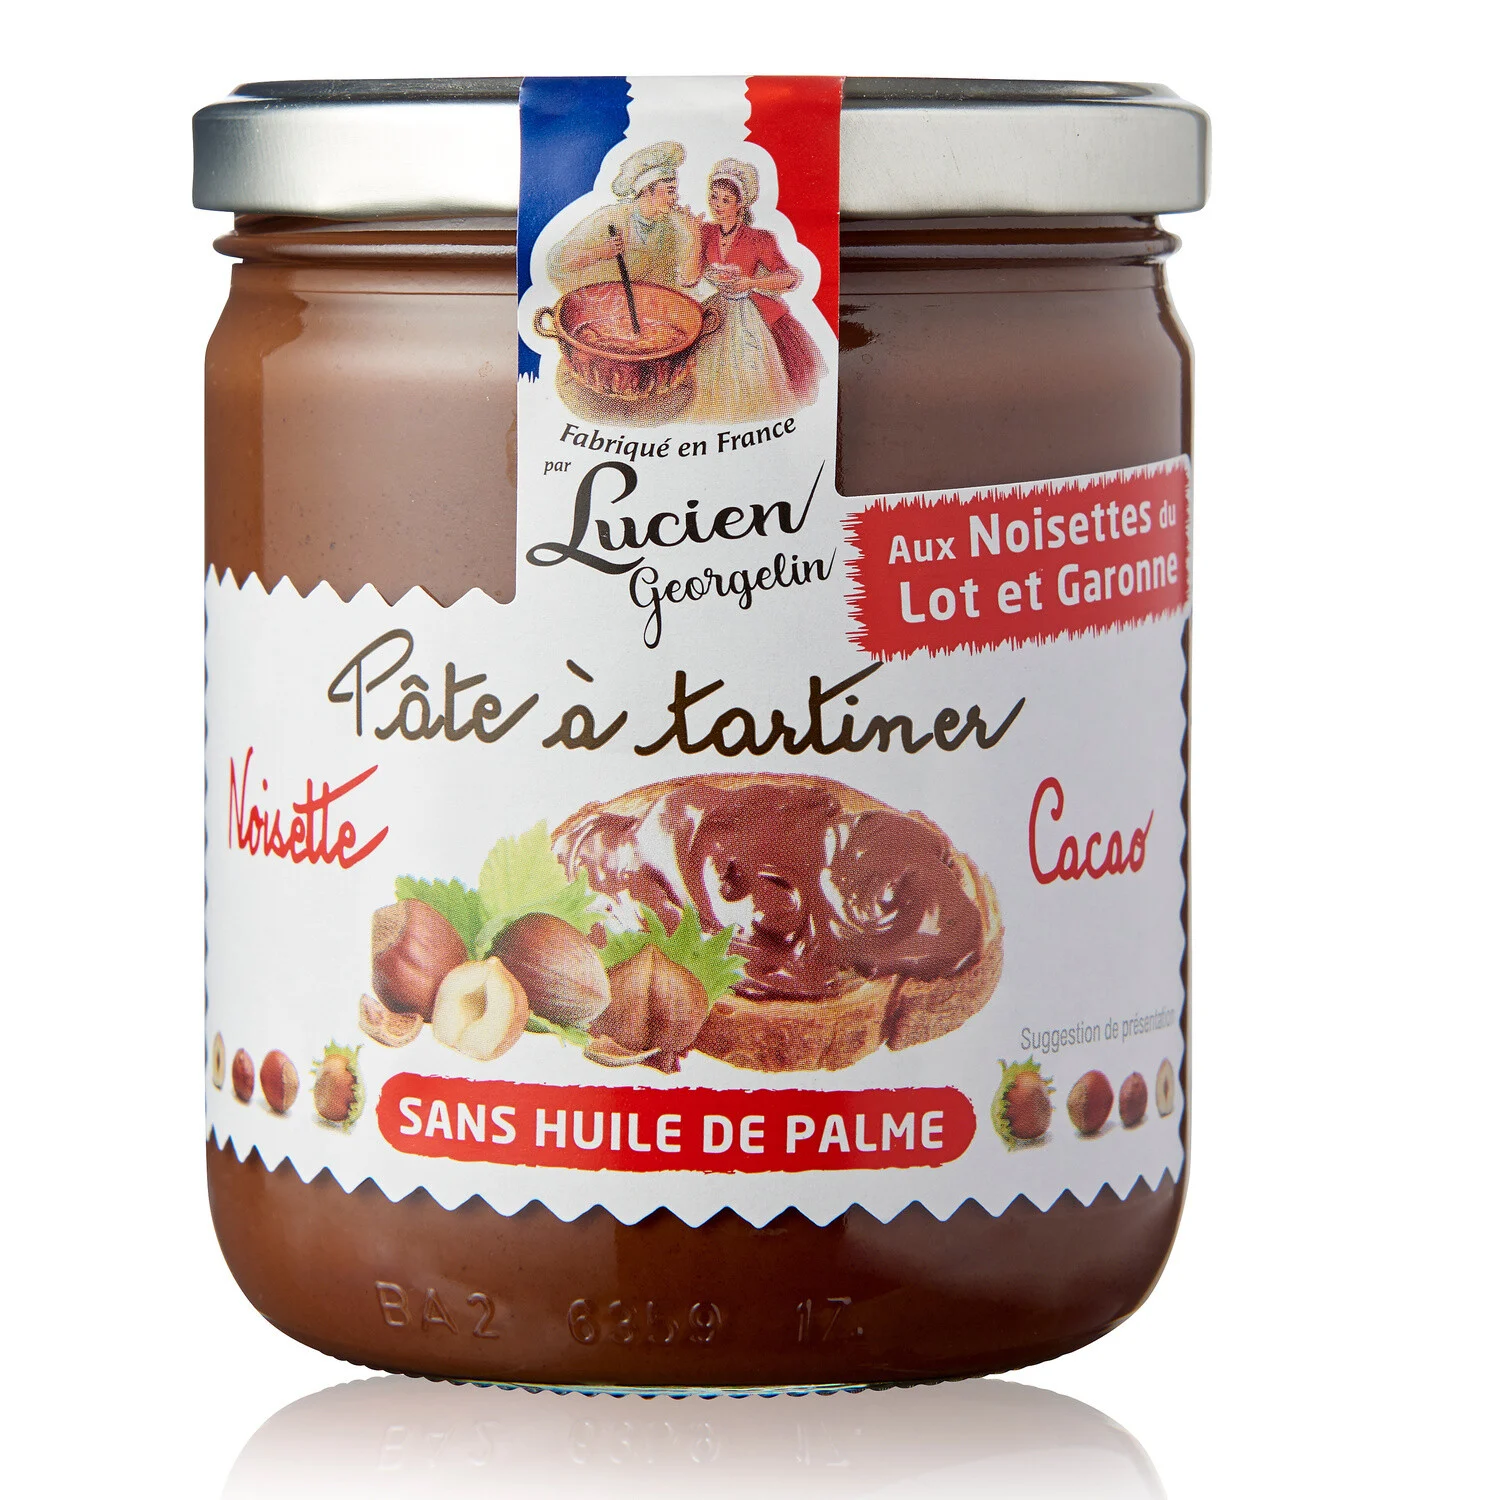 Hazelnut Spread From Lot Et Garonne And Cocoa
Without Palm Oil 400g - LUCIEN GEORGELIN